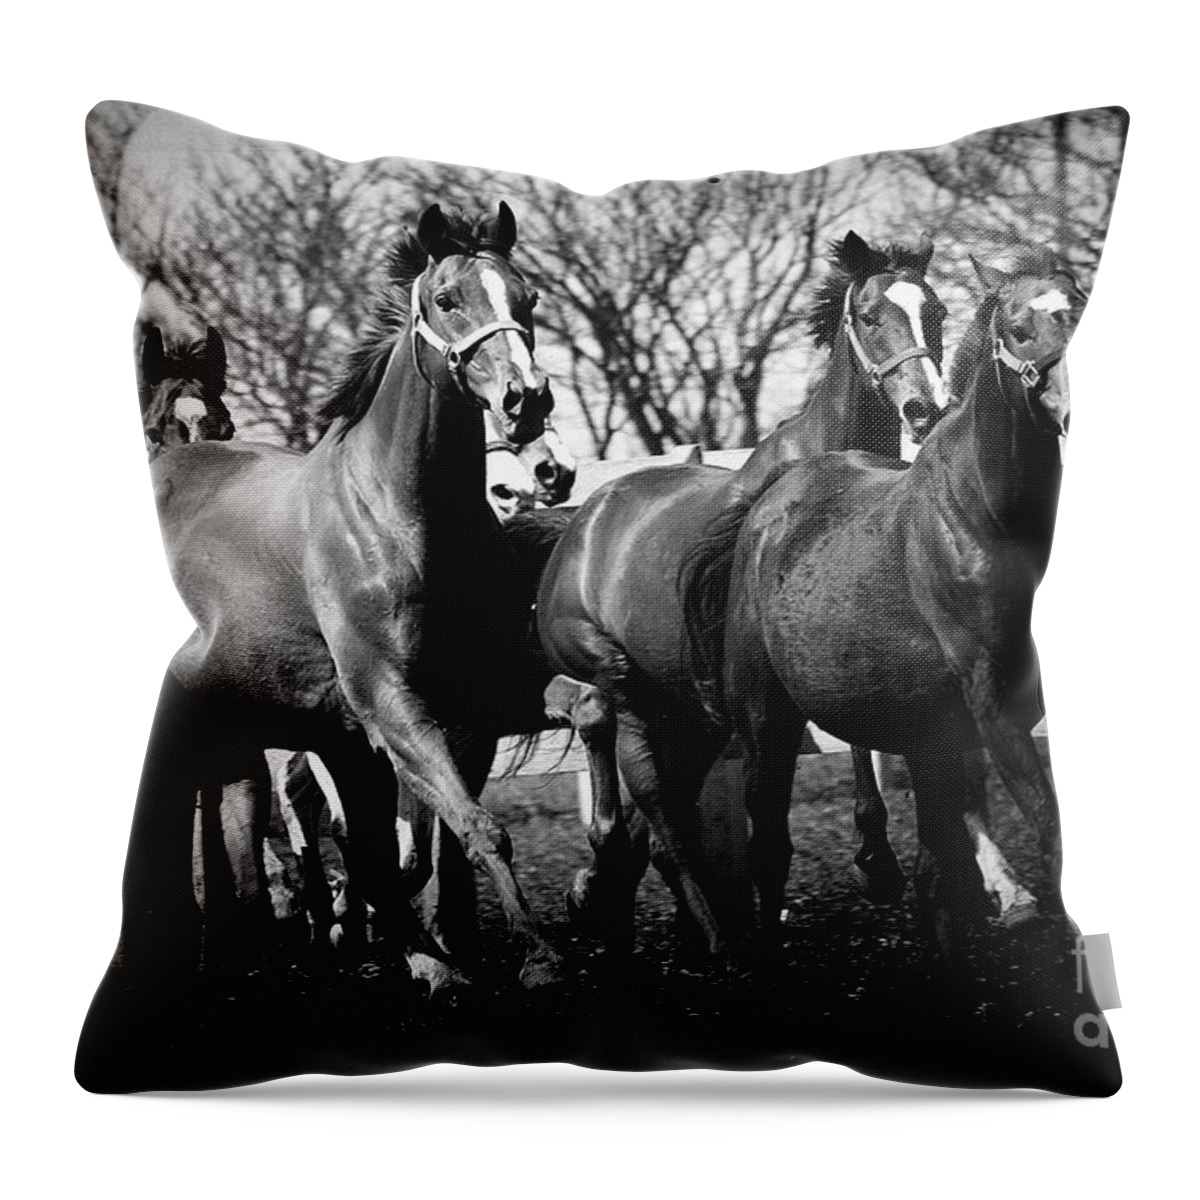 Horse Throw Pillow featuring the photograph Galloping horses by Dimitar Hristov